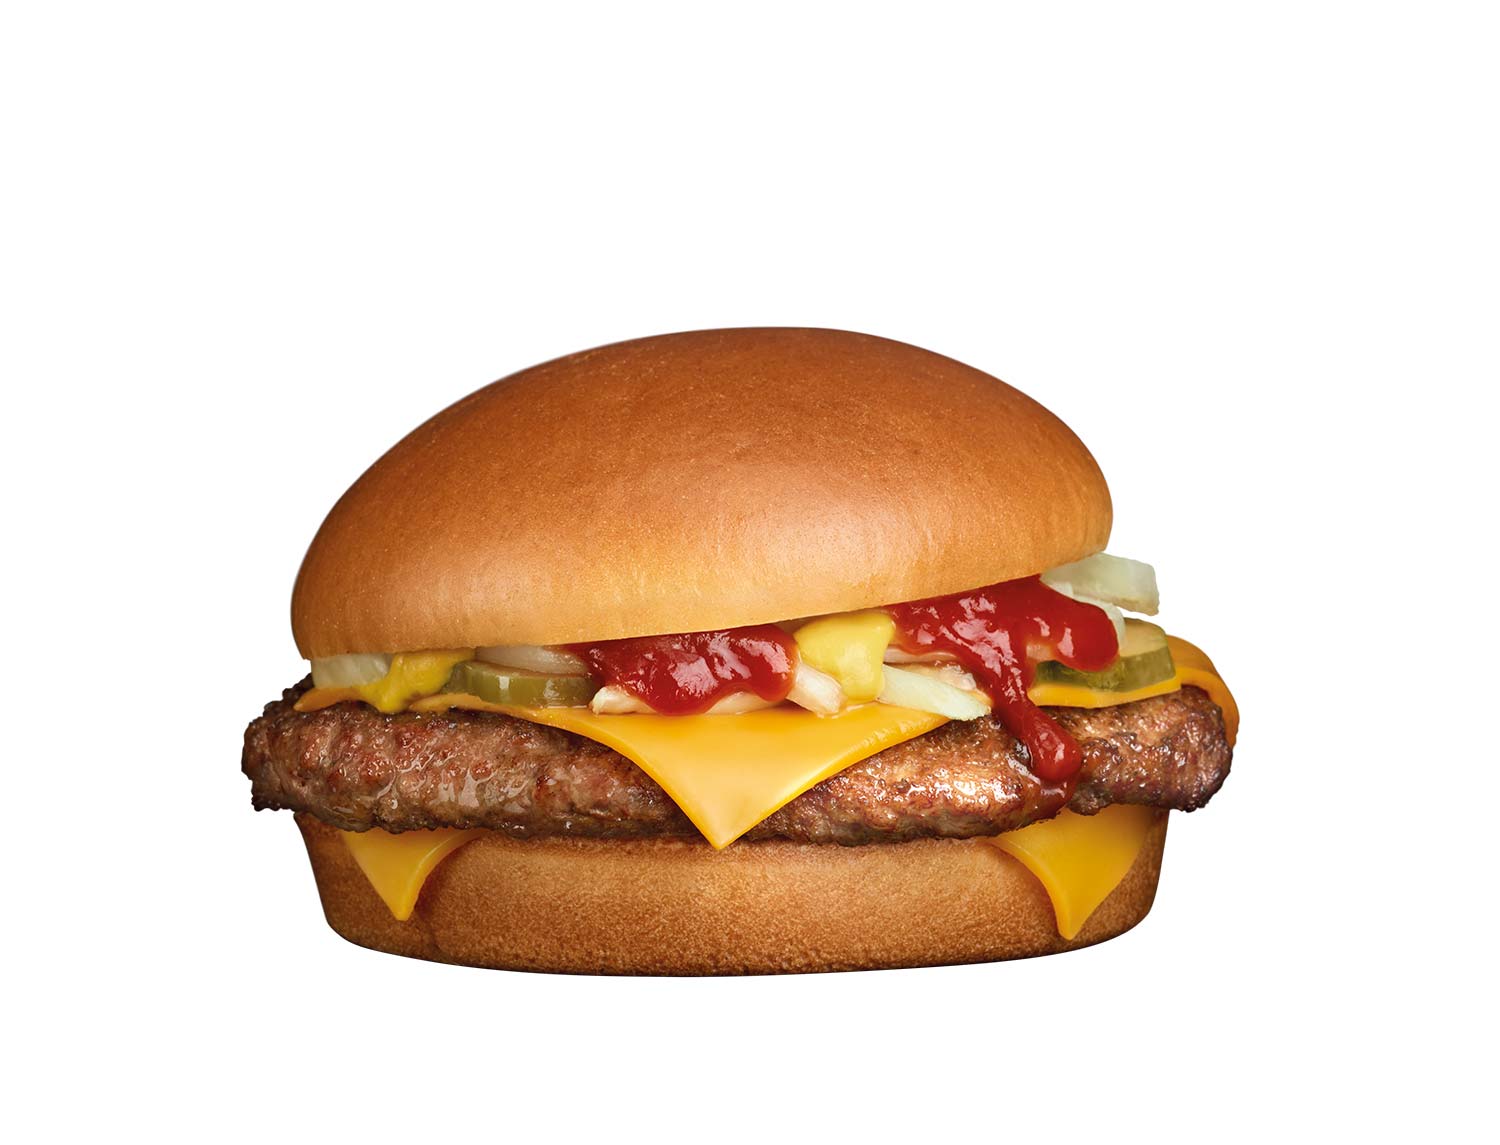 McDonald's Introduce 100% Angus Beef to the Signature Collection